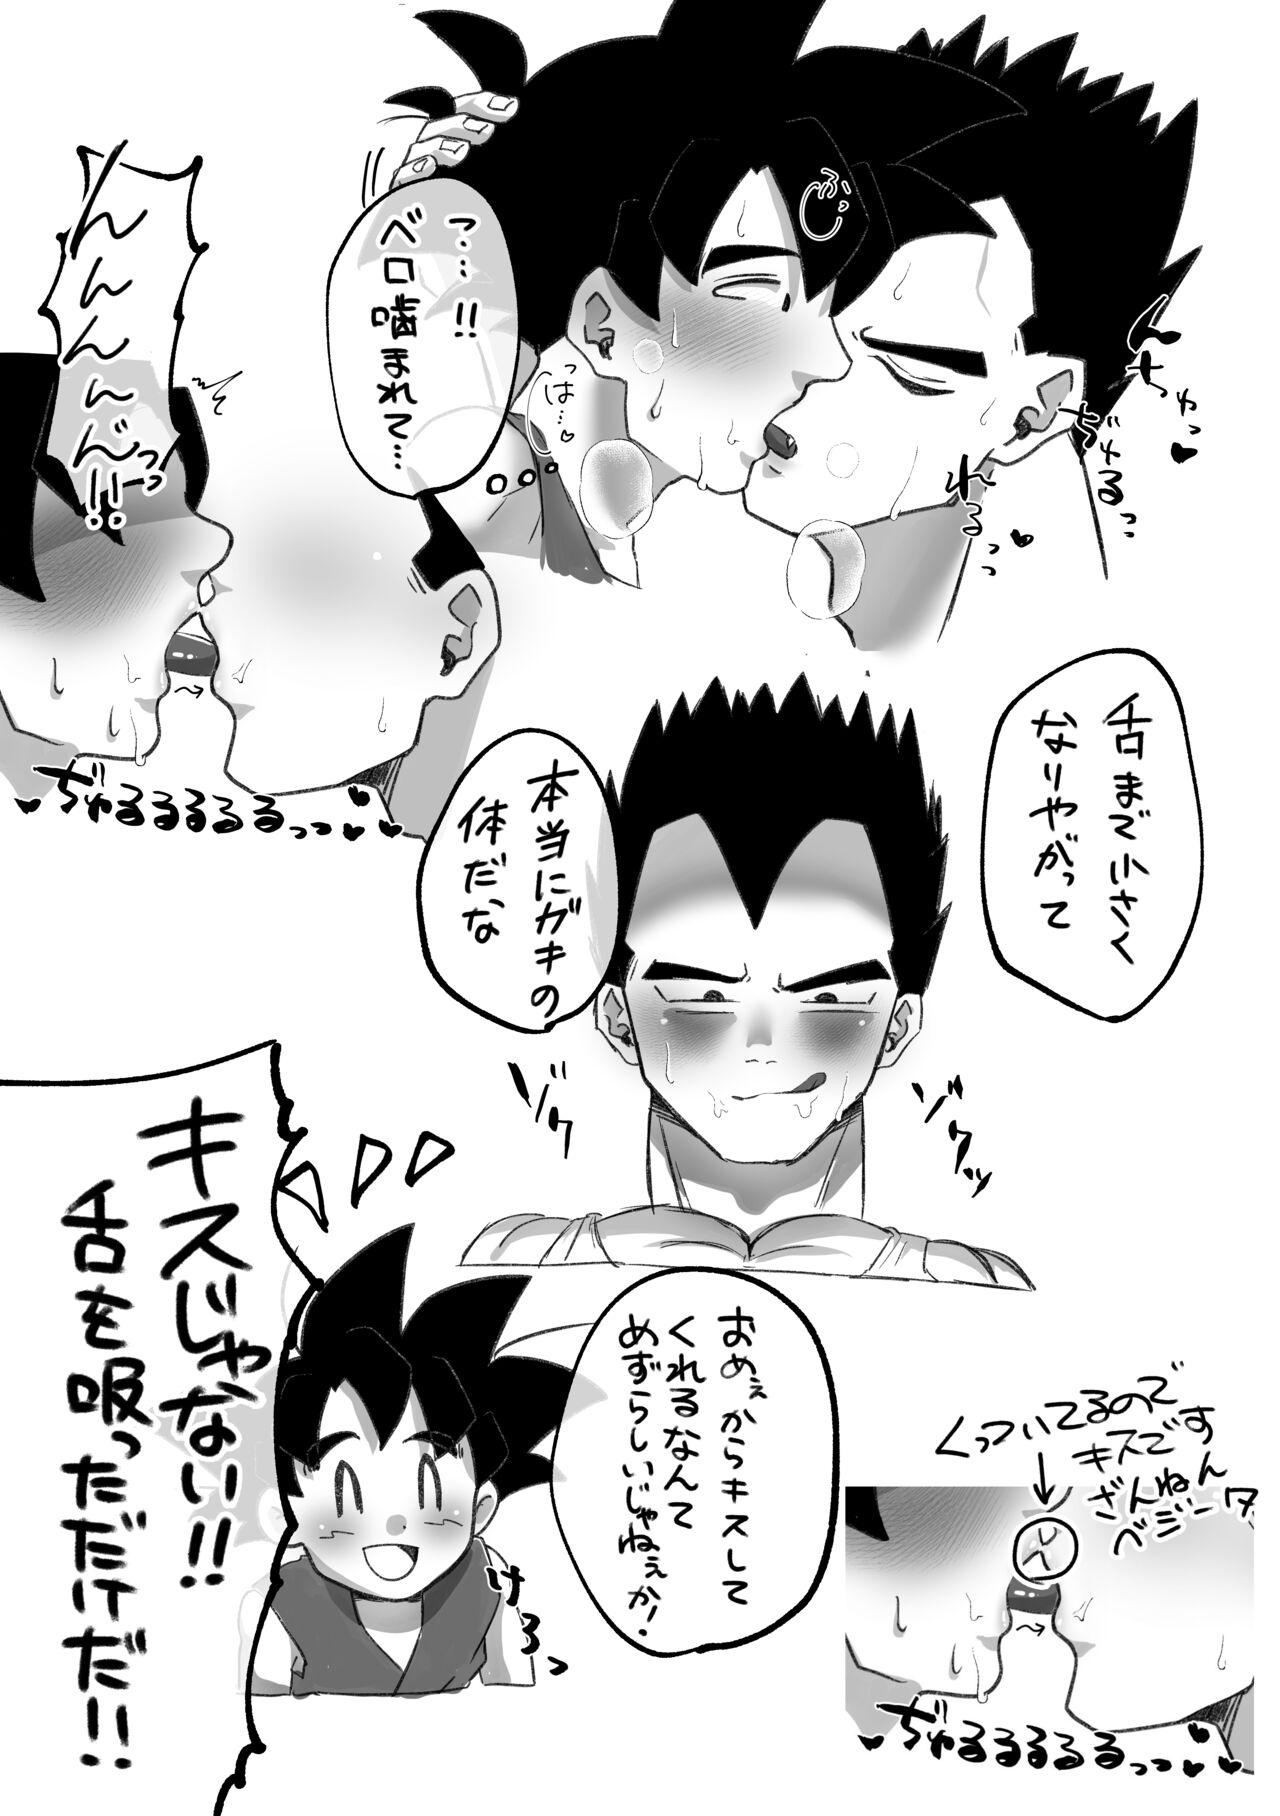 Relax GT no Dosukebe na KakaVege - Dragon ball gt Gay Shorthair - Page 4